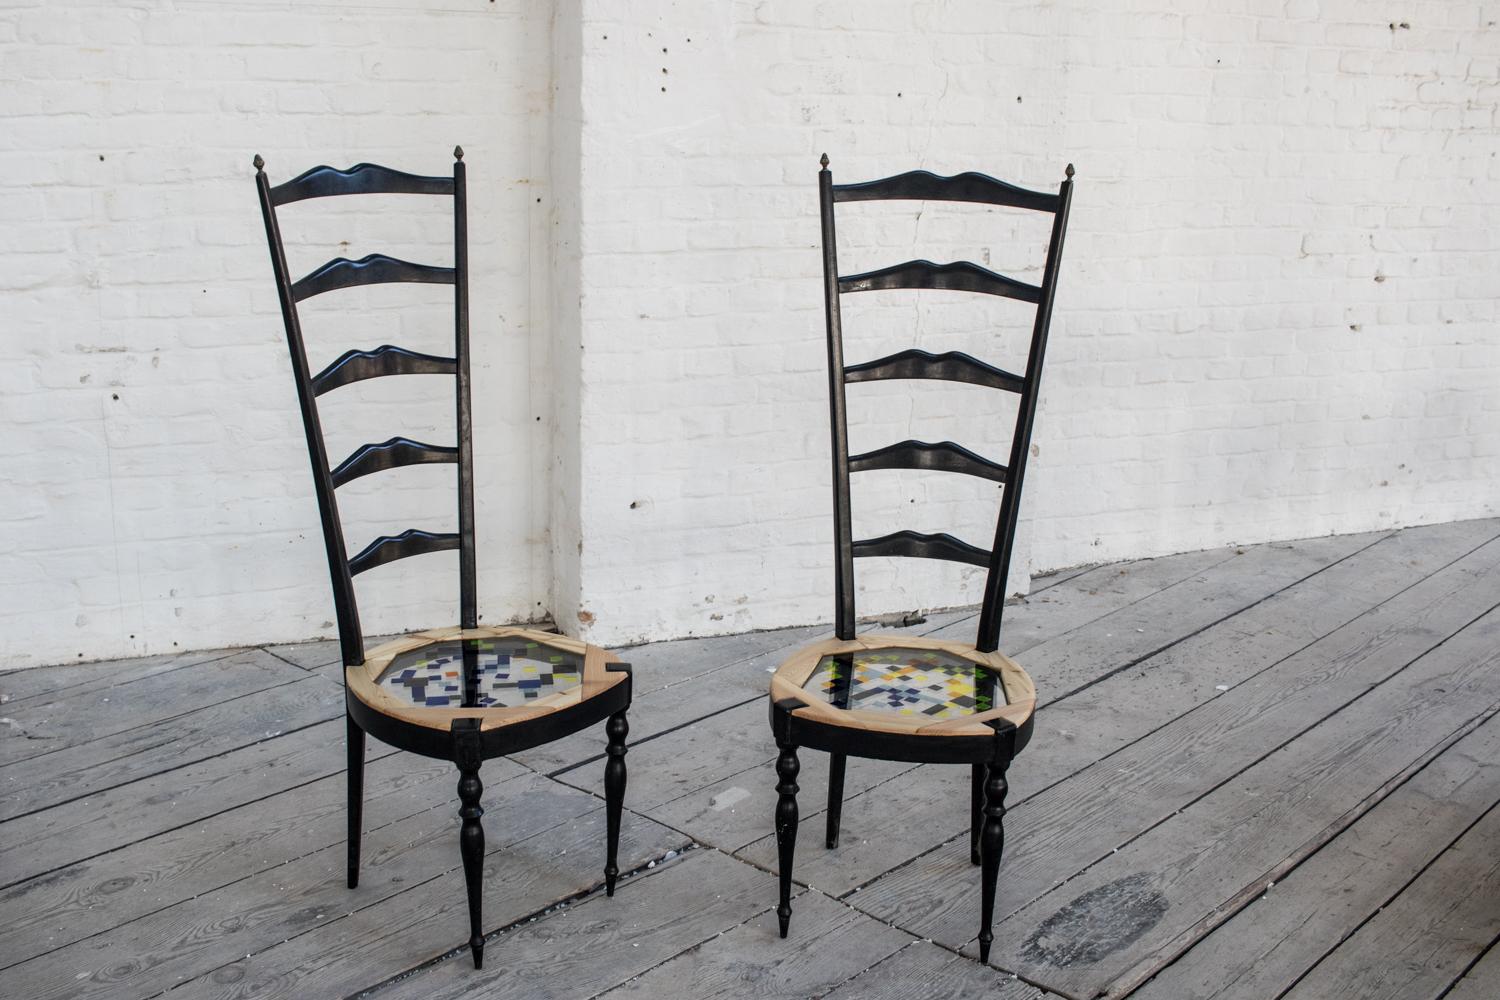 The tall mosaiced chairs are in their style similar to the chairs of the famous designer Mackintosh who inspired many artisans at the beginning of the 20th century as this couple of antique chairs shows. The original sitting has been replaced with a